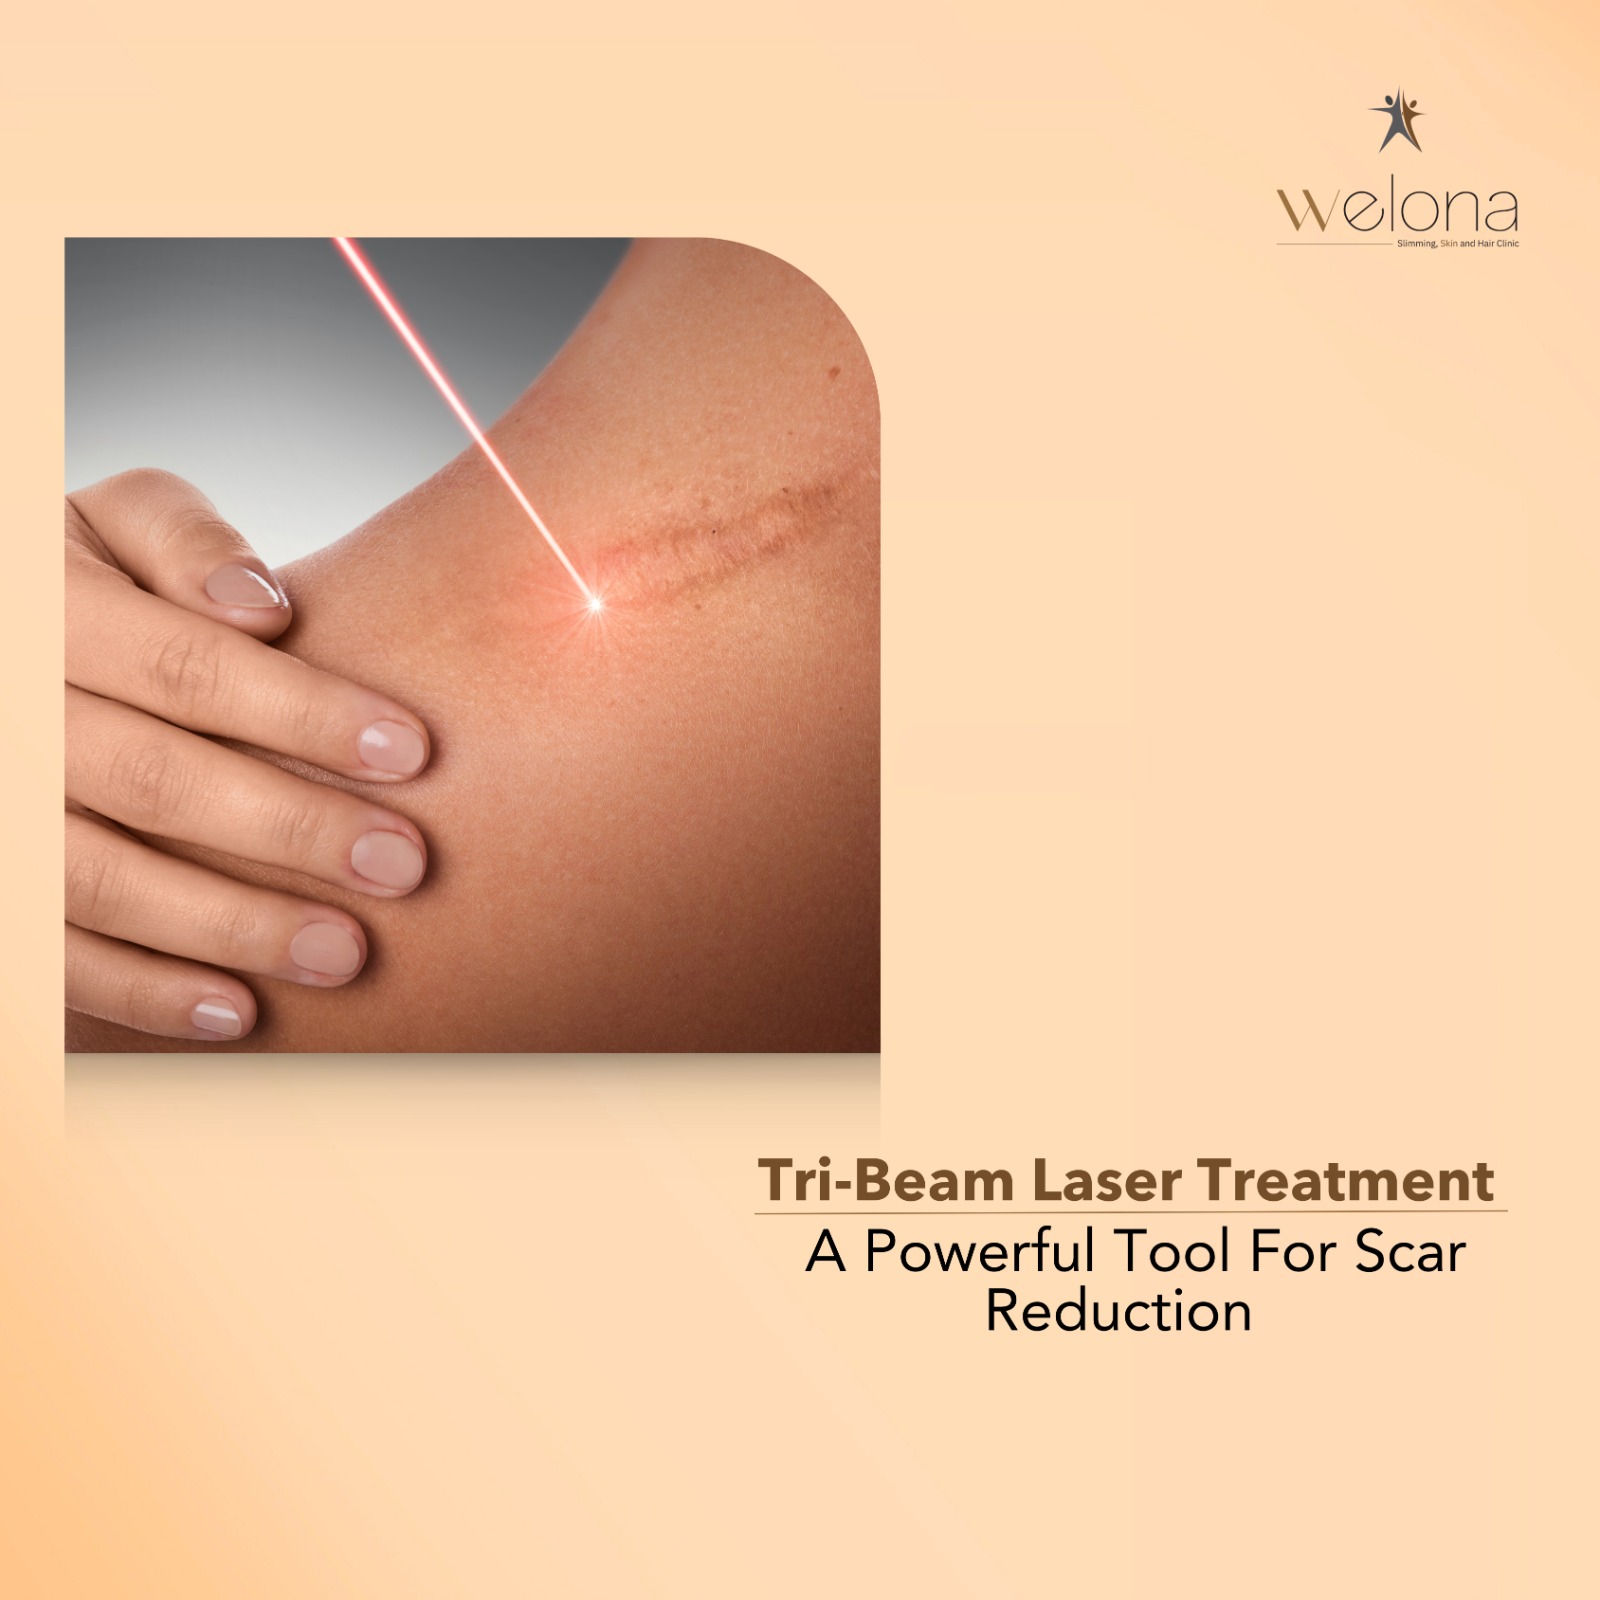 Welona’s Tri-Beam Laser Treatment – A Powerful Tool For Scar Reduction